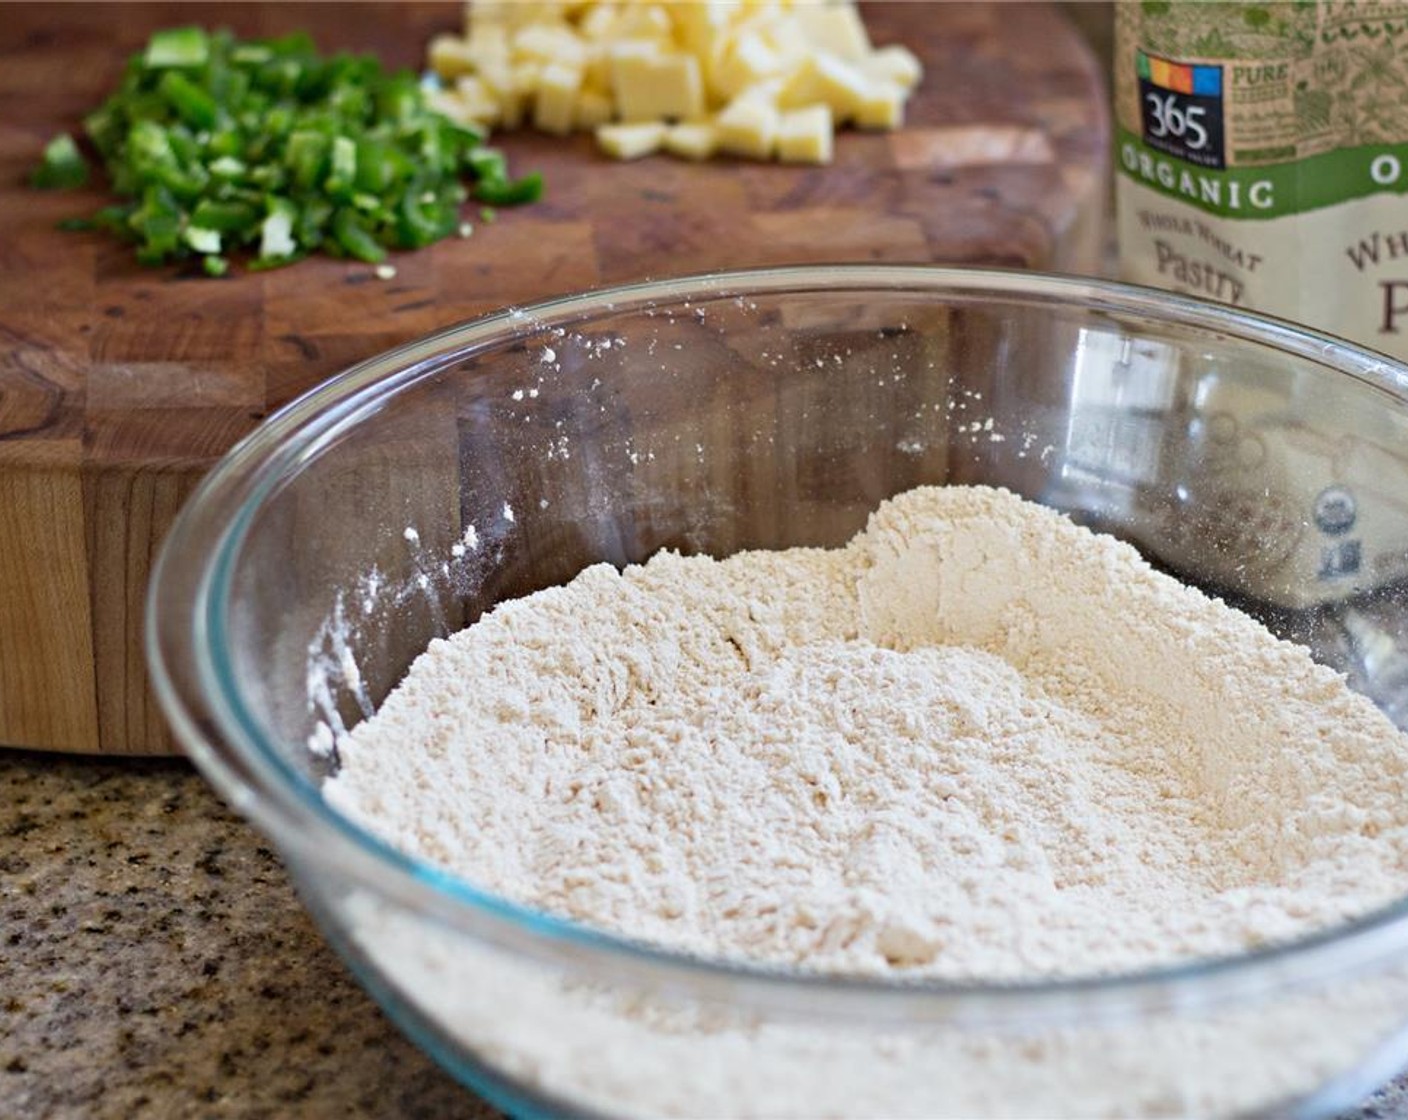 step 3 In a large bowl, combine the Whole Wheat Flour (2 1/2 cups), Baking Powder (1 Tbsp), and Salt (1 tsp).